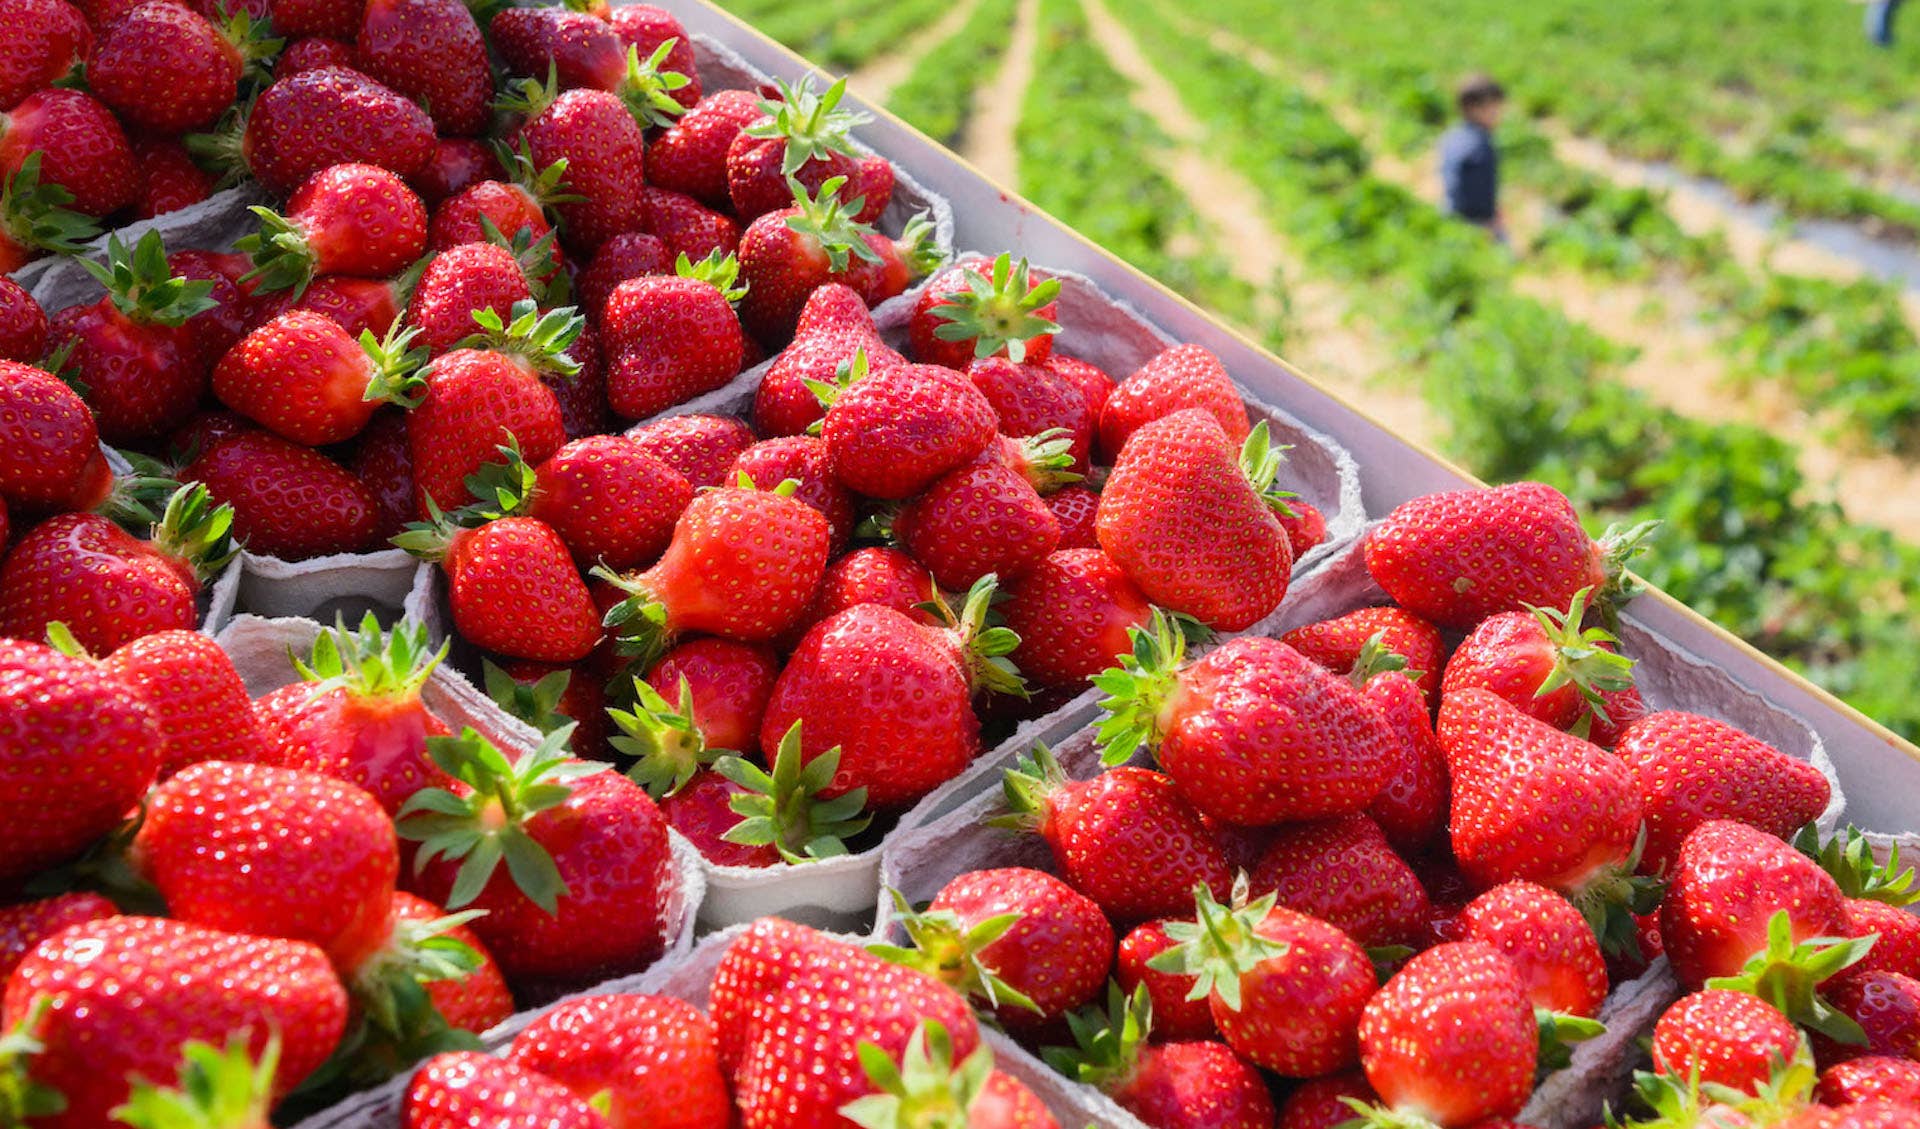 FDA investigating outbreak of Hepatitis A potentially linked to strawberries